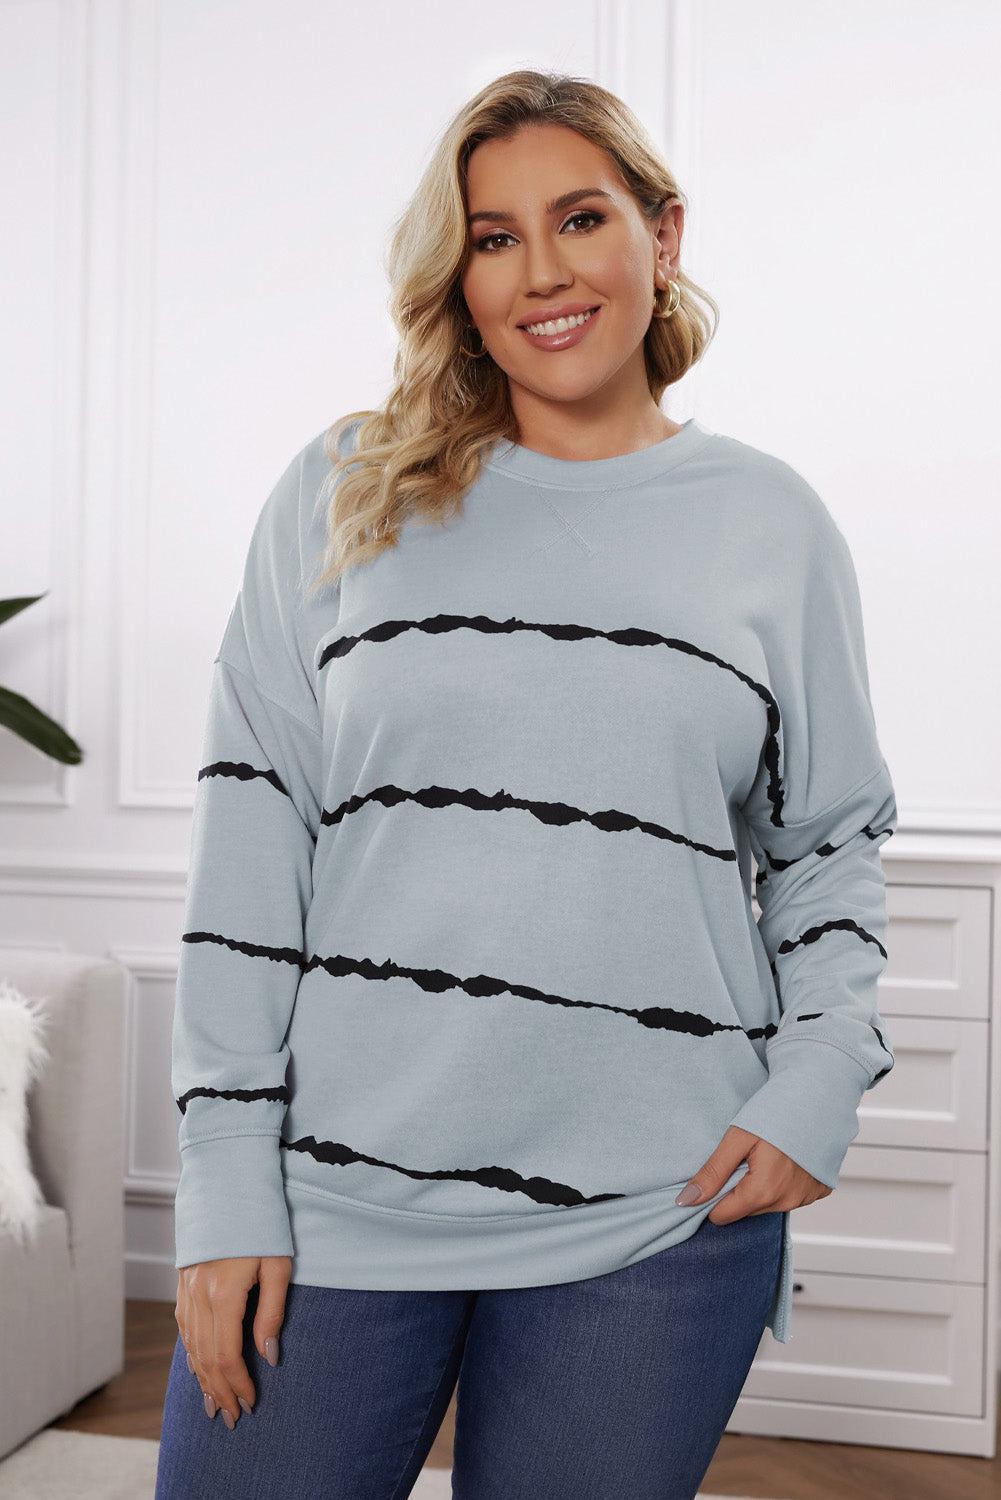 a woman wearing a blue sweater with black stripes